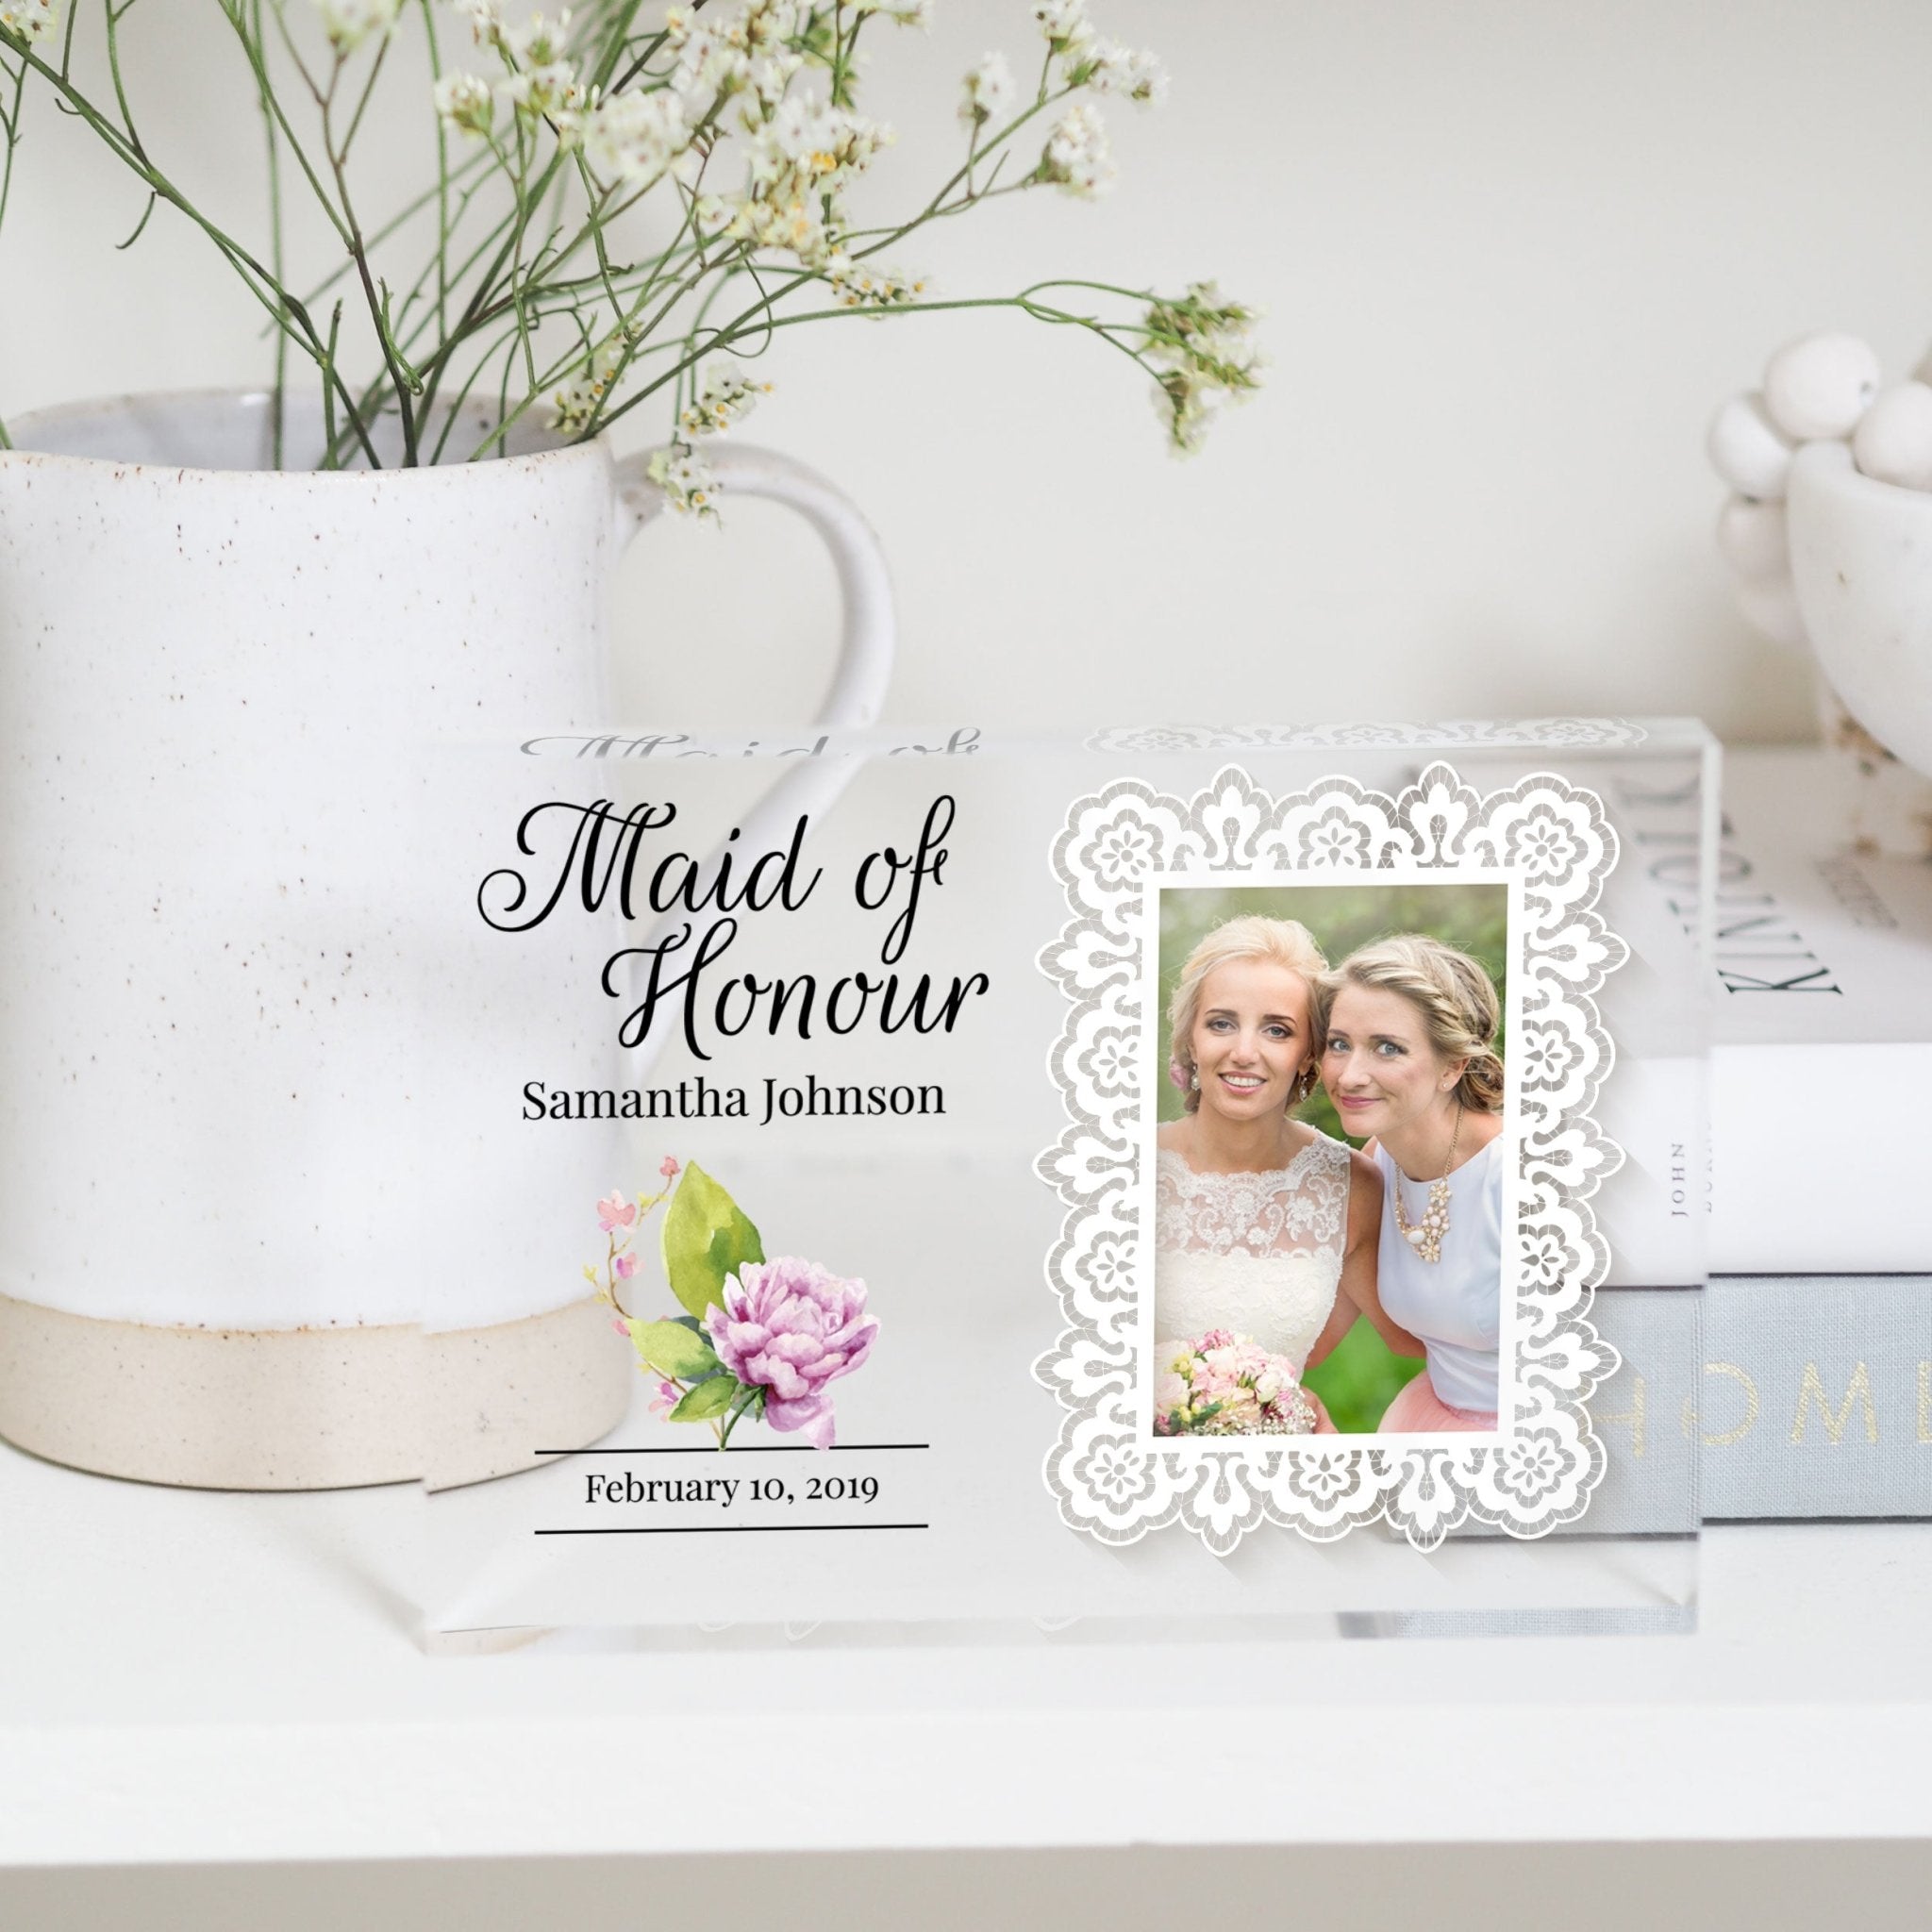 Bridesmaid Gifts | Maid of Honor Frame | Maid of Honor Gift PhotoBlock - Unique Prints